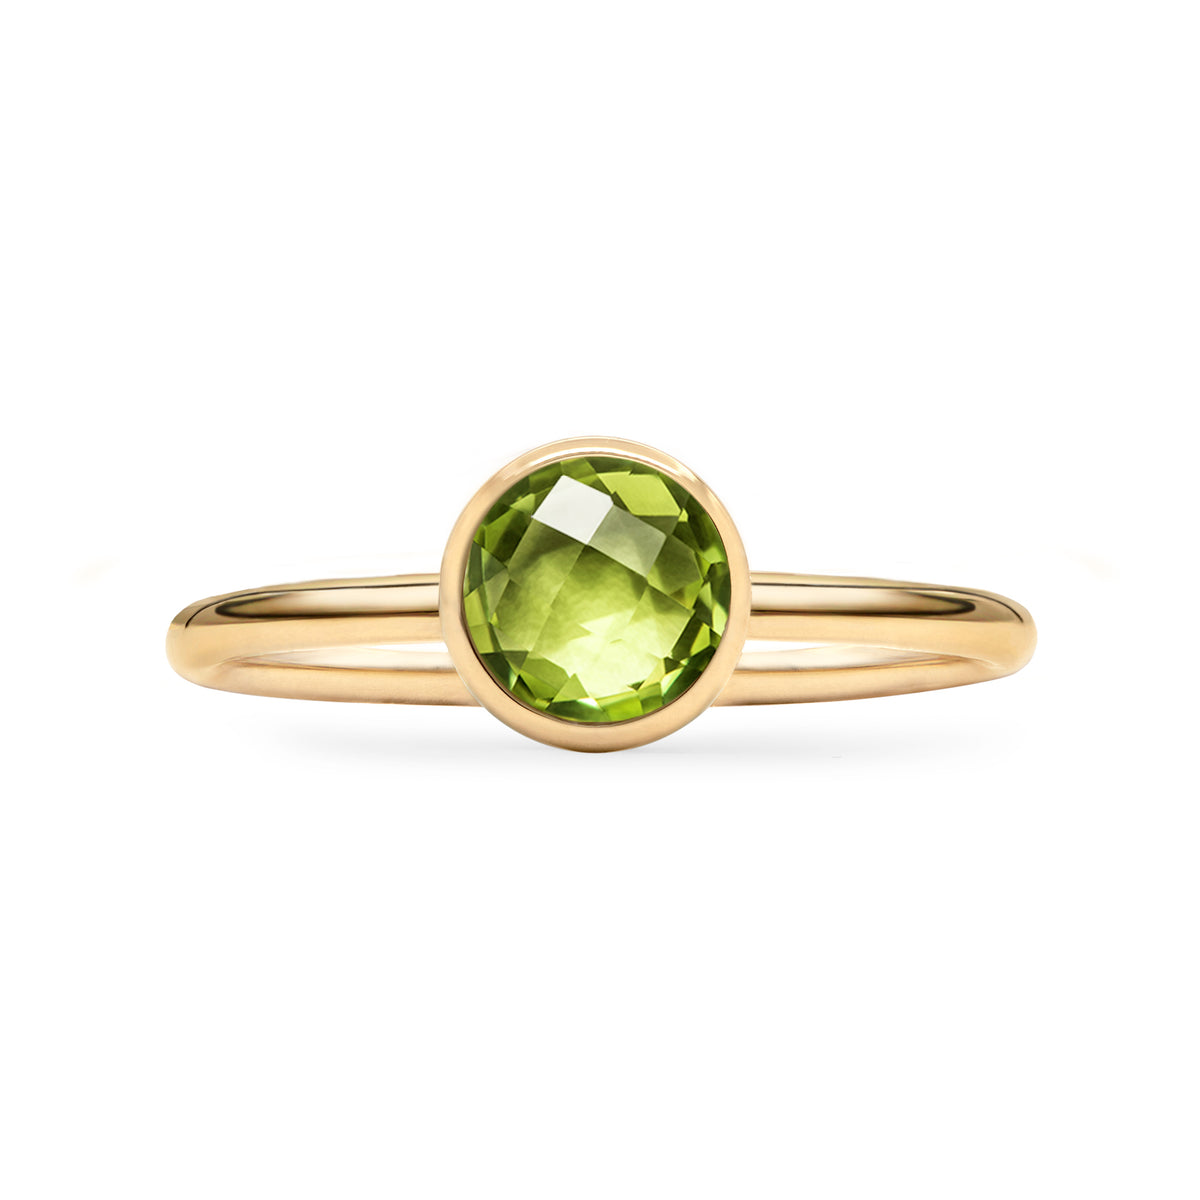 Grand Peridot Ring in 14k Gold (August)